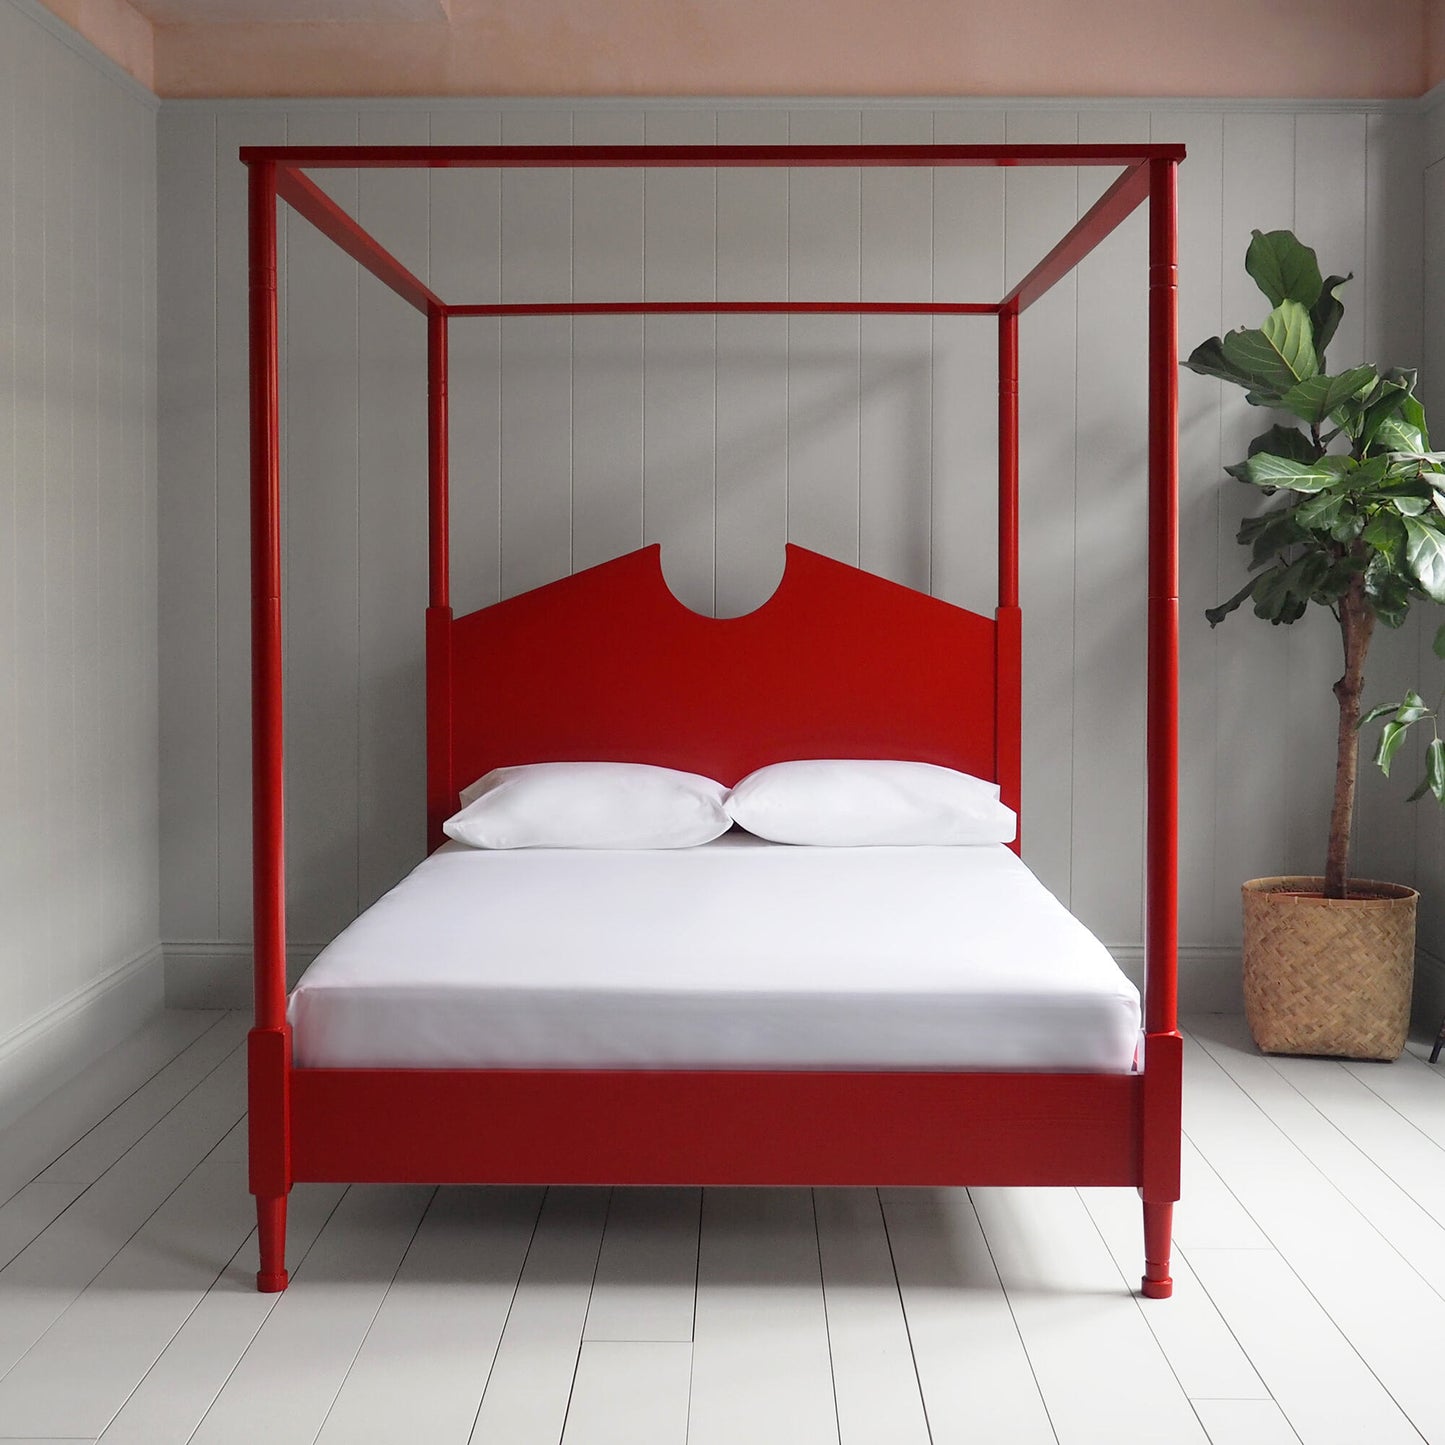 Out for the Count Four Poster Bed in Ruby Red